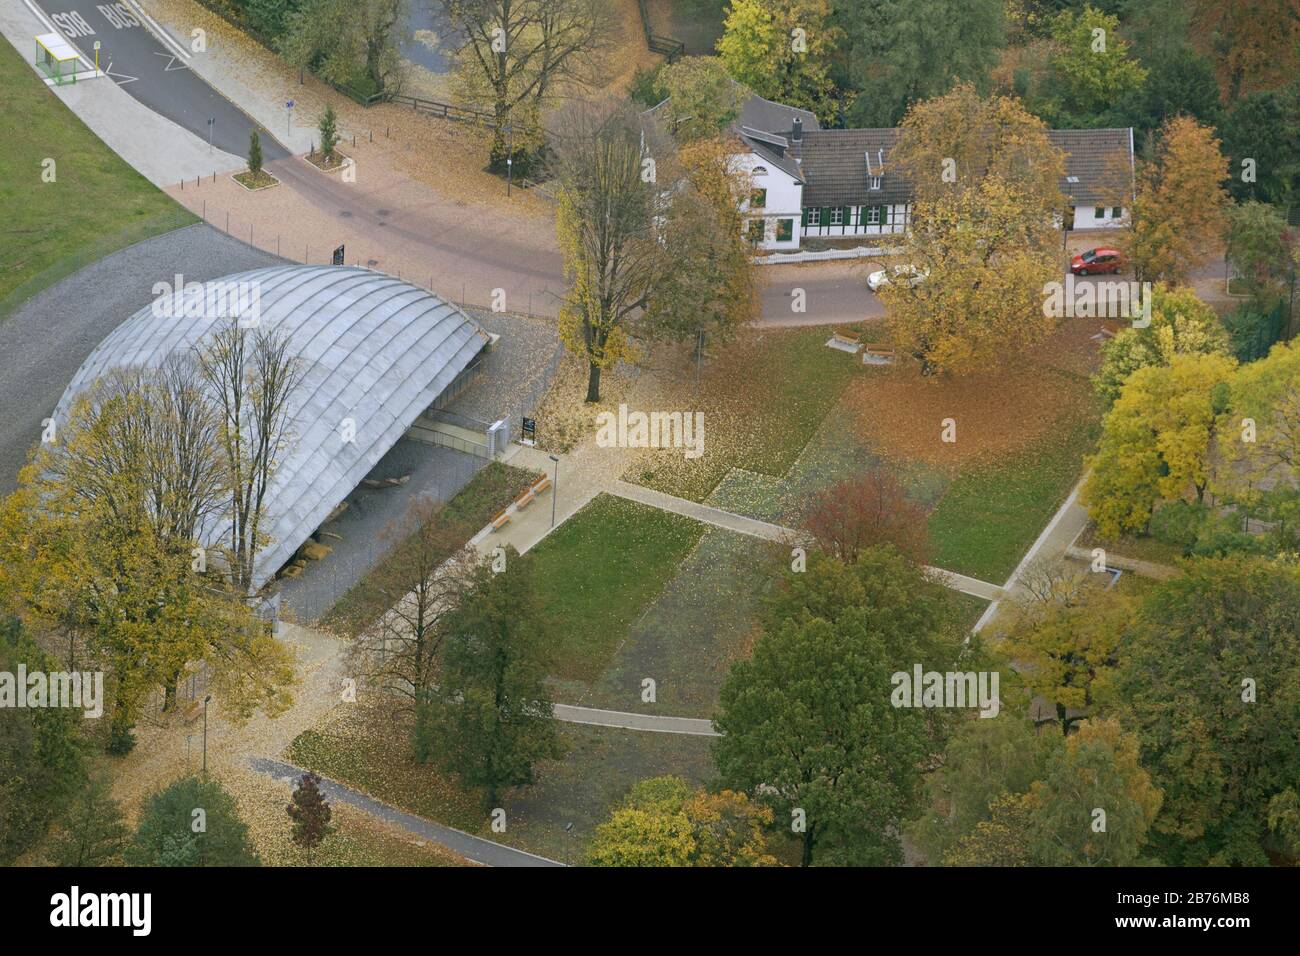 , roof over the arceological excavations at St. Antony-Huette, 26.10.2012, aerial view, Germany, North Rhine-Westphalia, Ruhr Area, Oberhausen Stock Photo